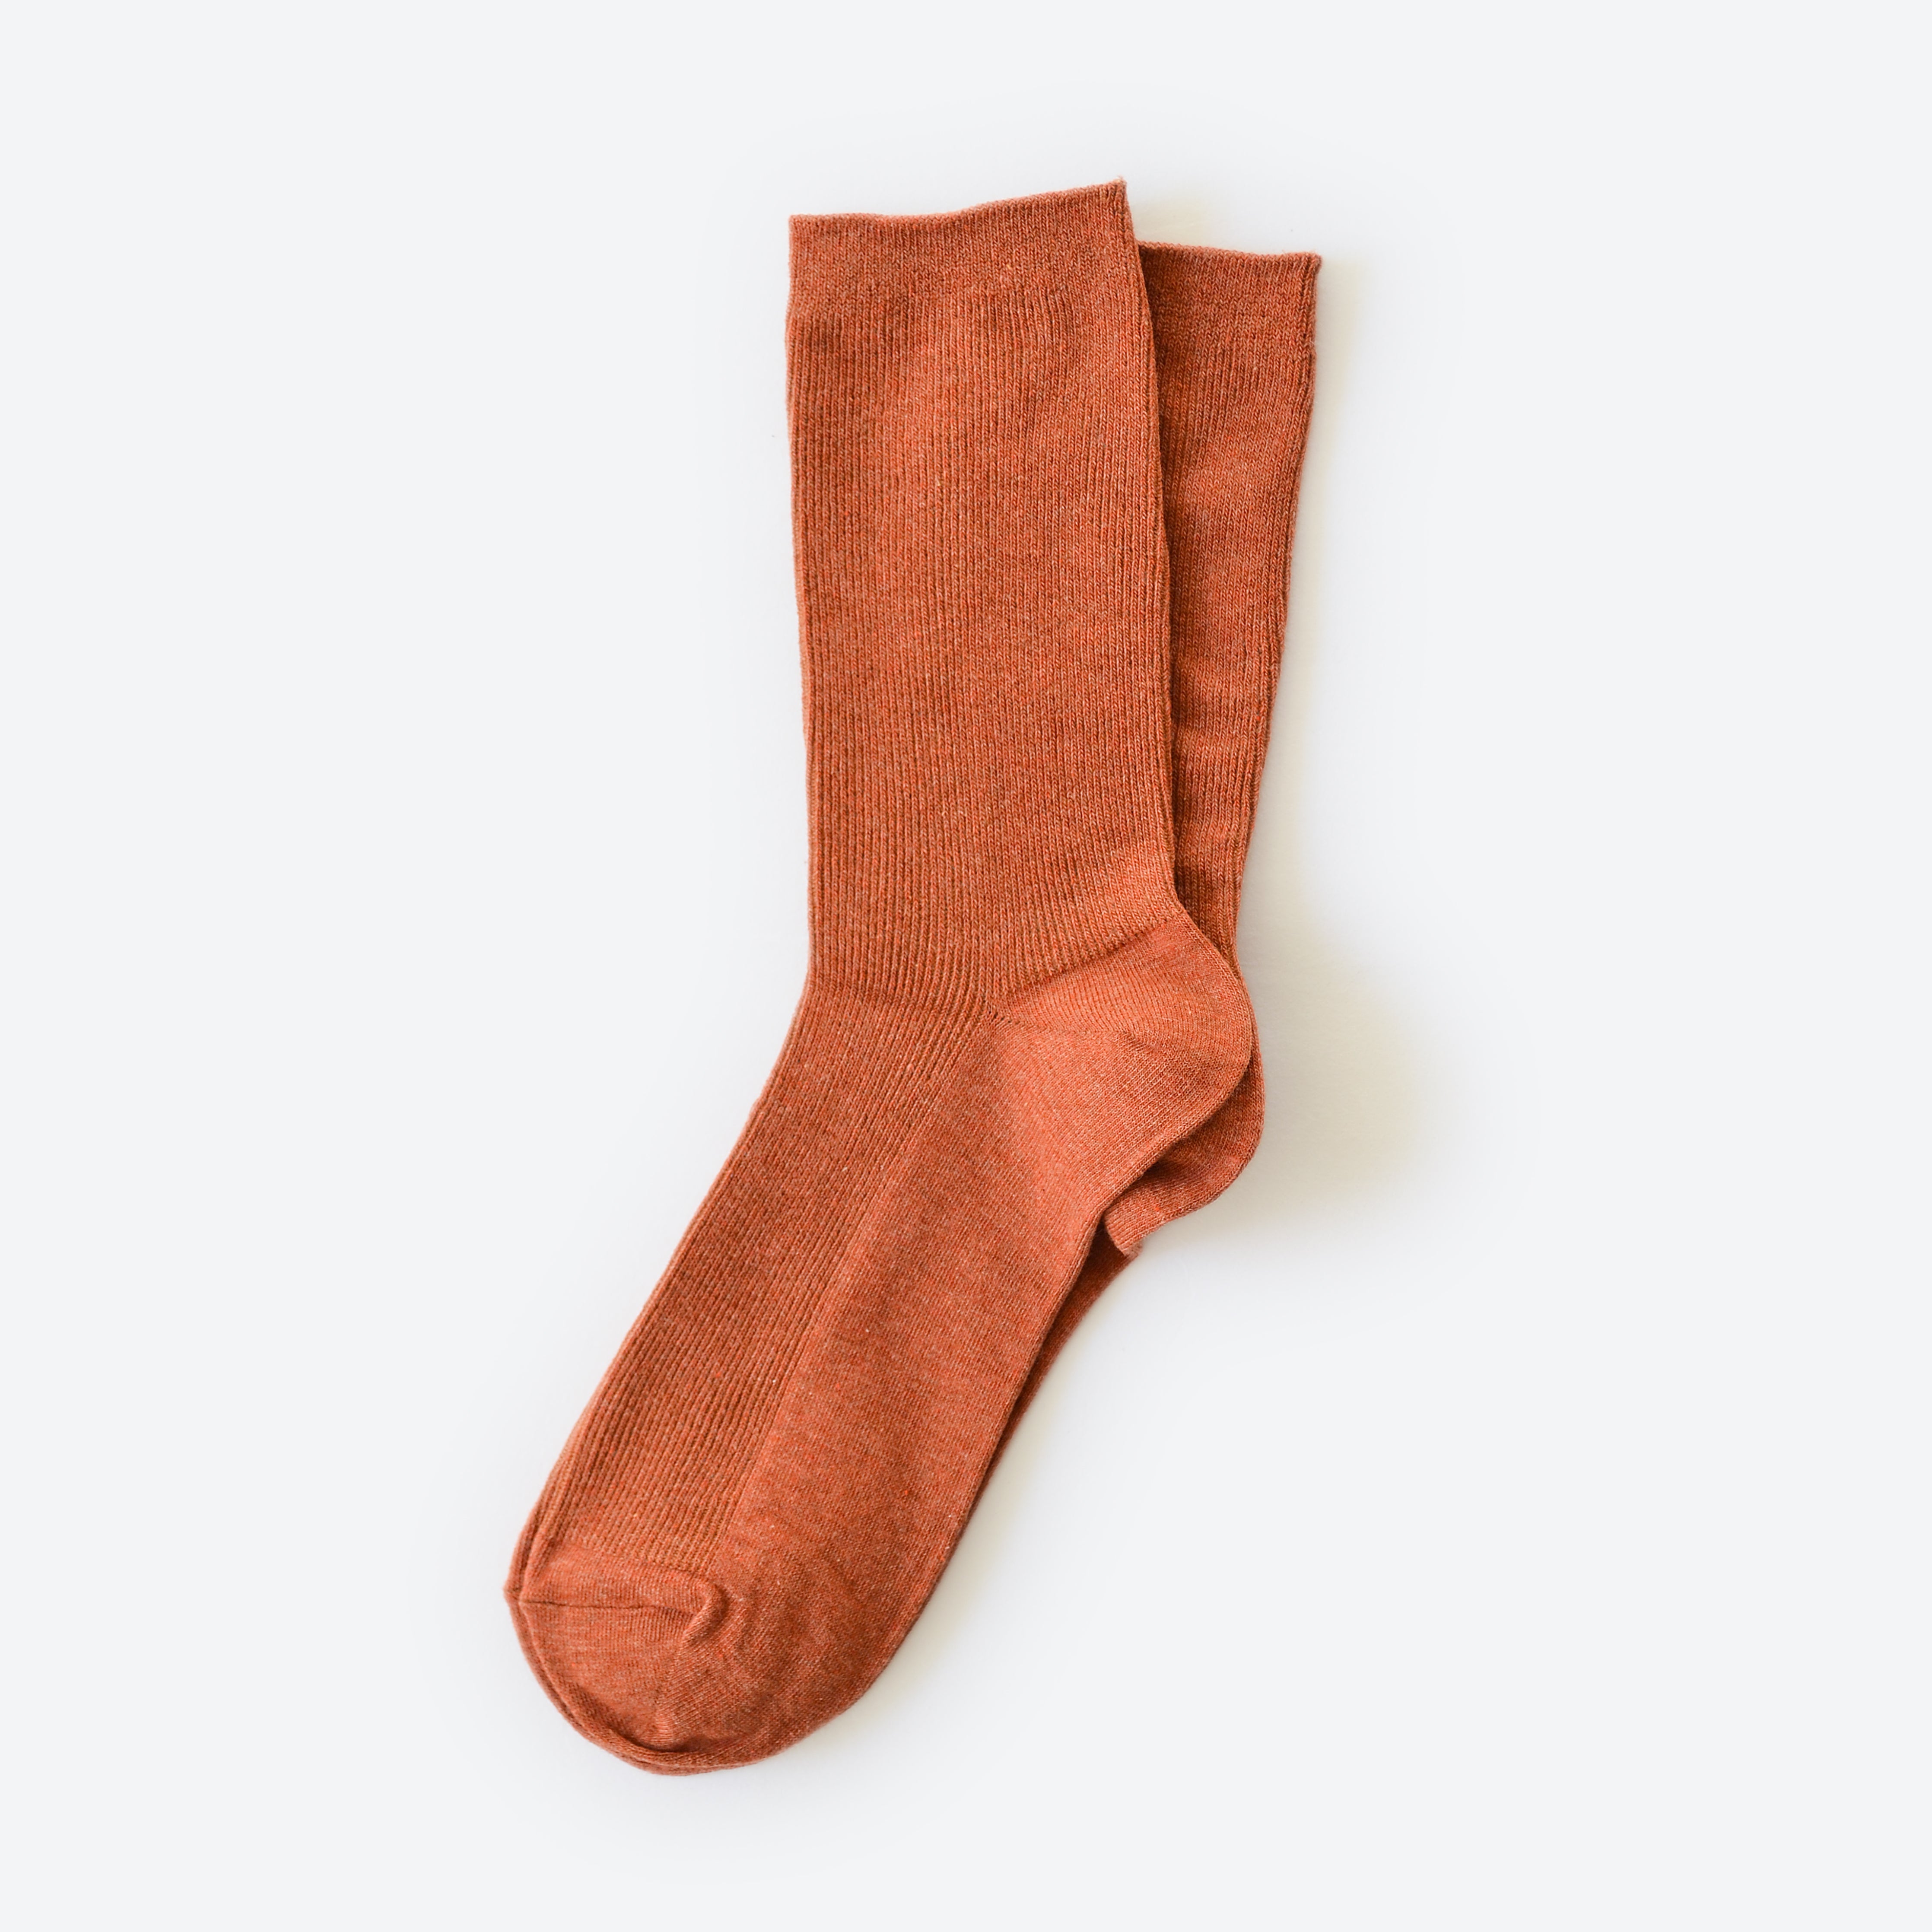 Hooray Sock Co.&#39;s Spice Crew Socks. Everyday comfort and style in Spice Brown. Unisex, shorter crew length. 80% cotton, 20% spandex. Size: Small (Women’s 4-10).